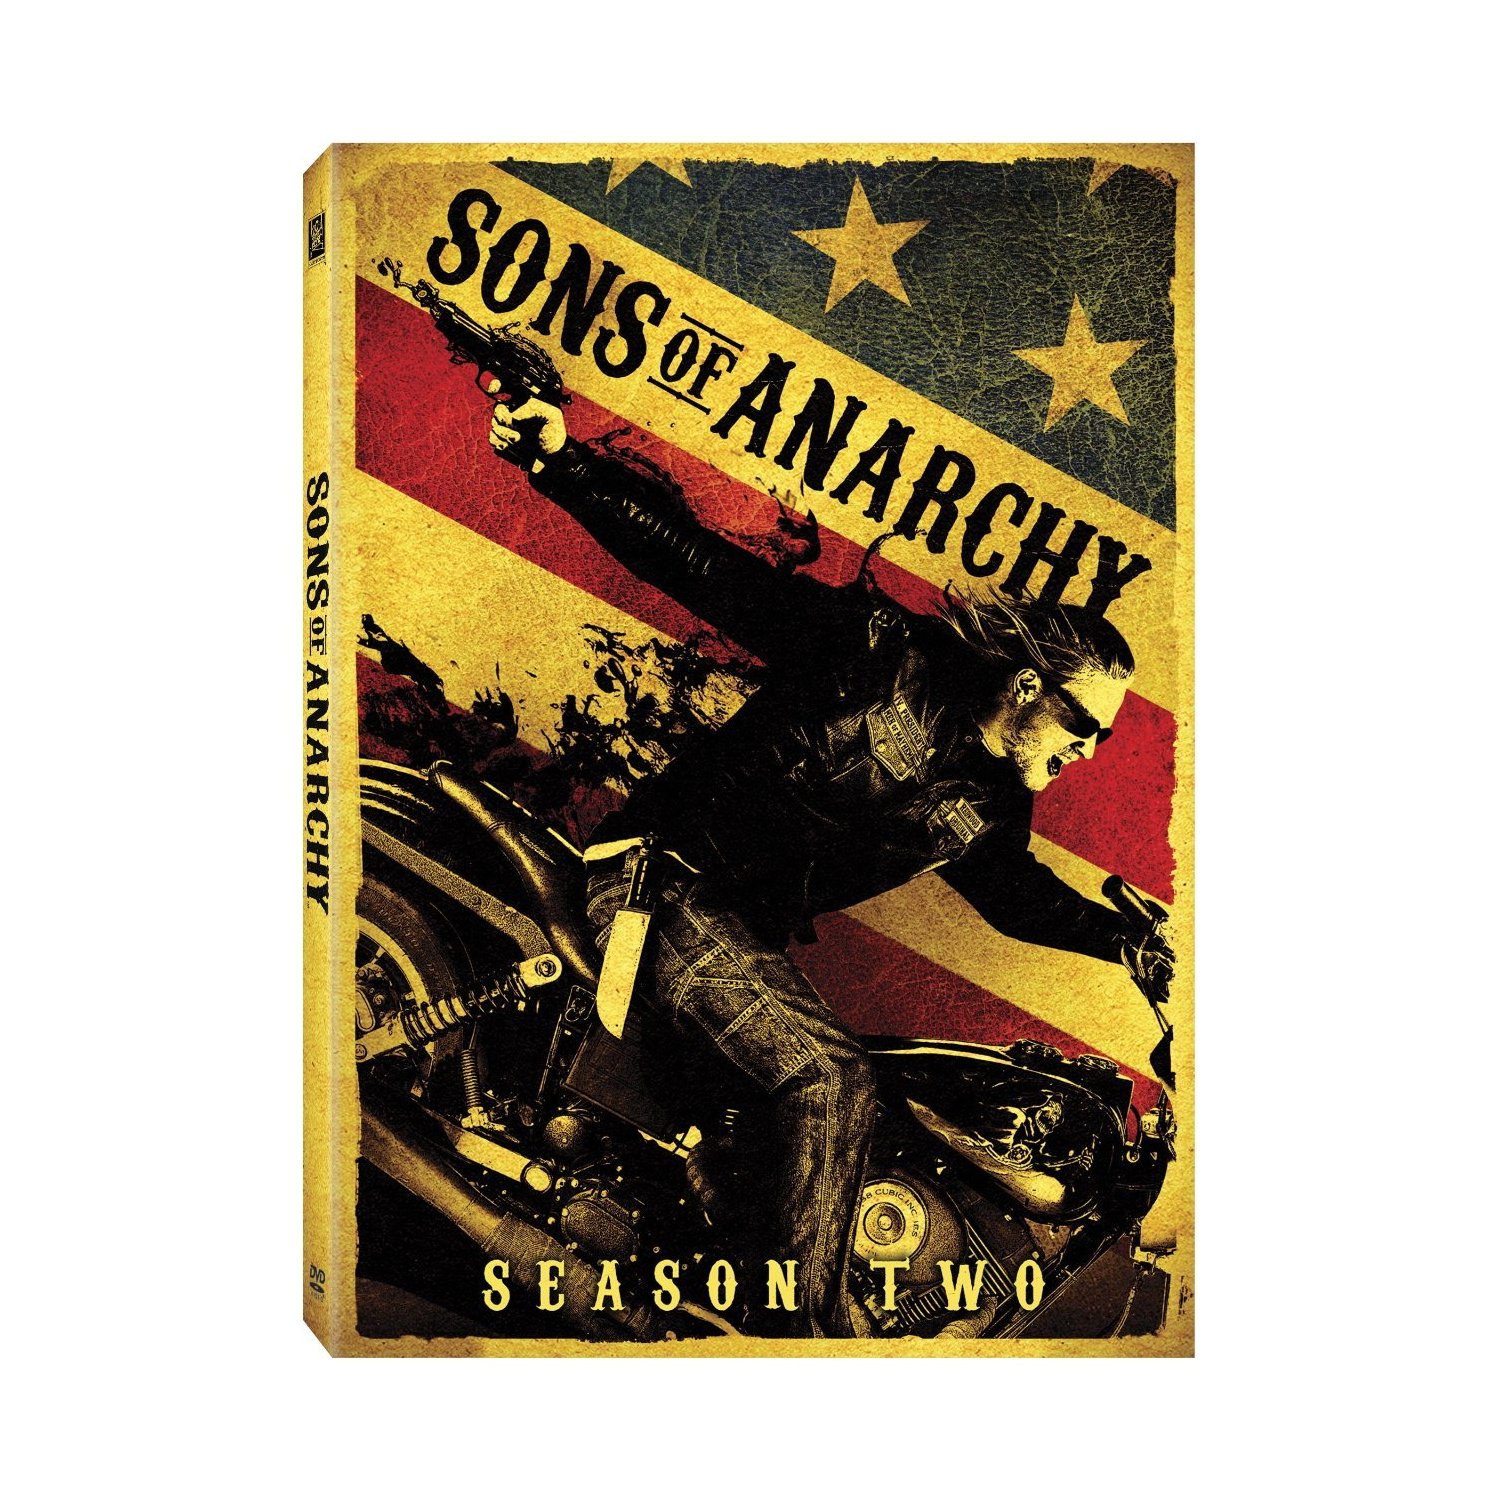 Sons of Anarchy Season 2 Disk 4